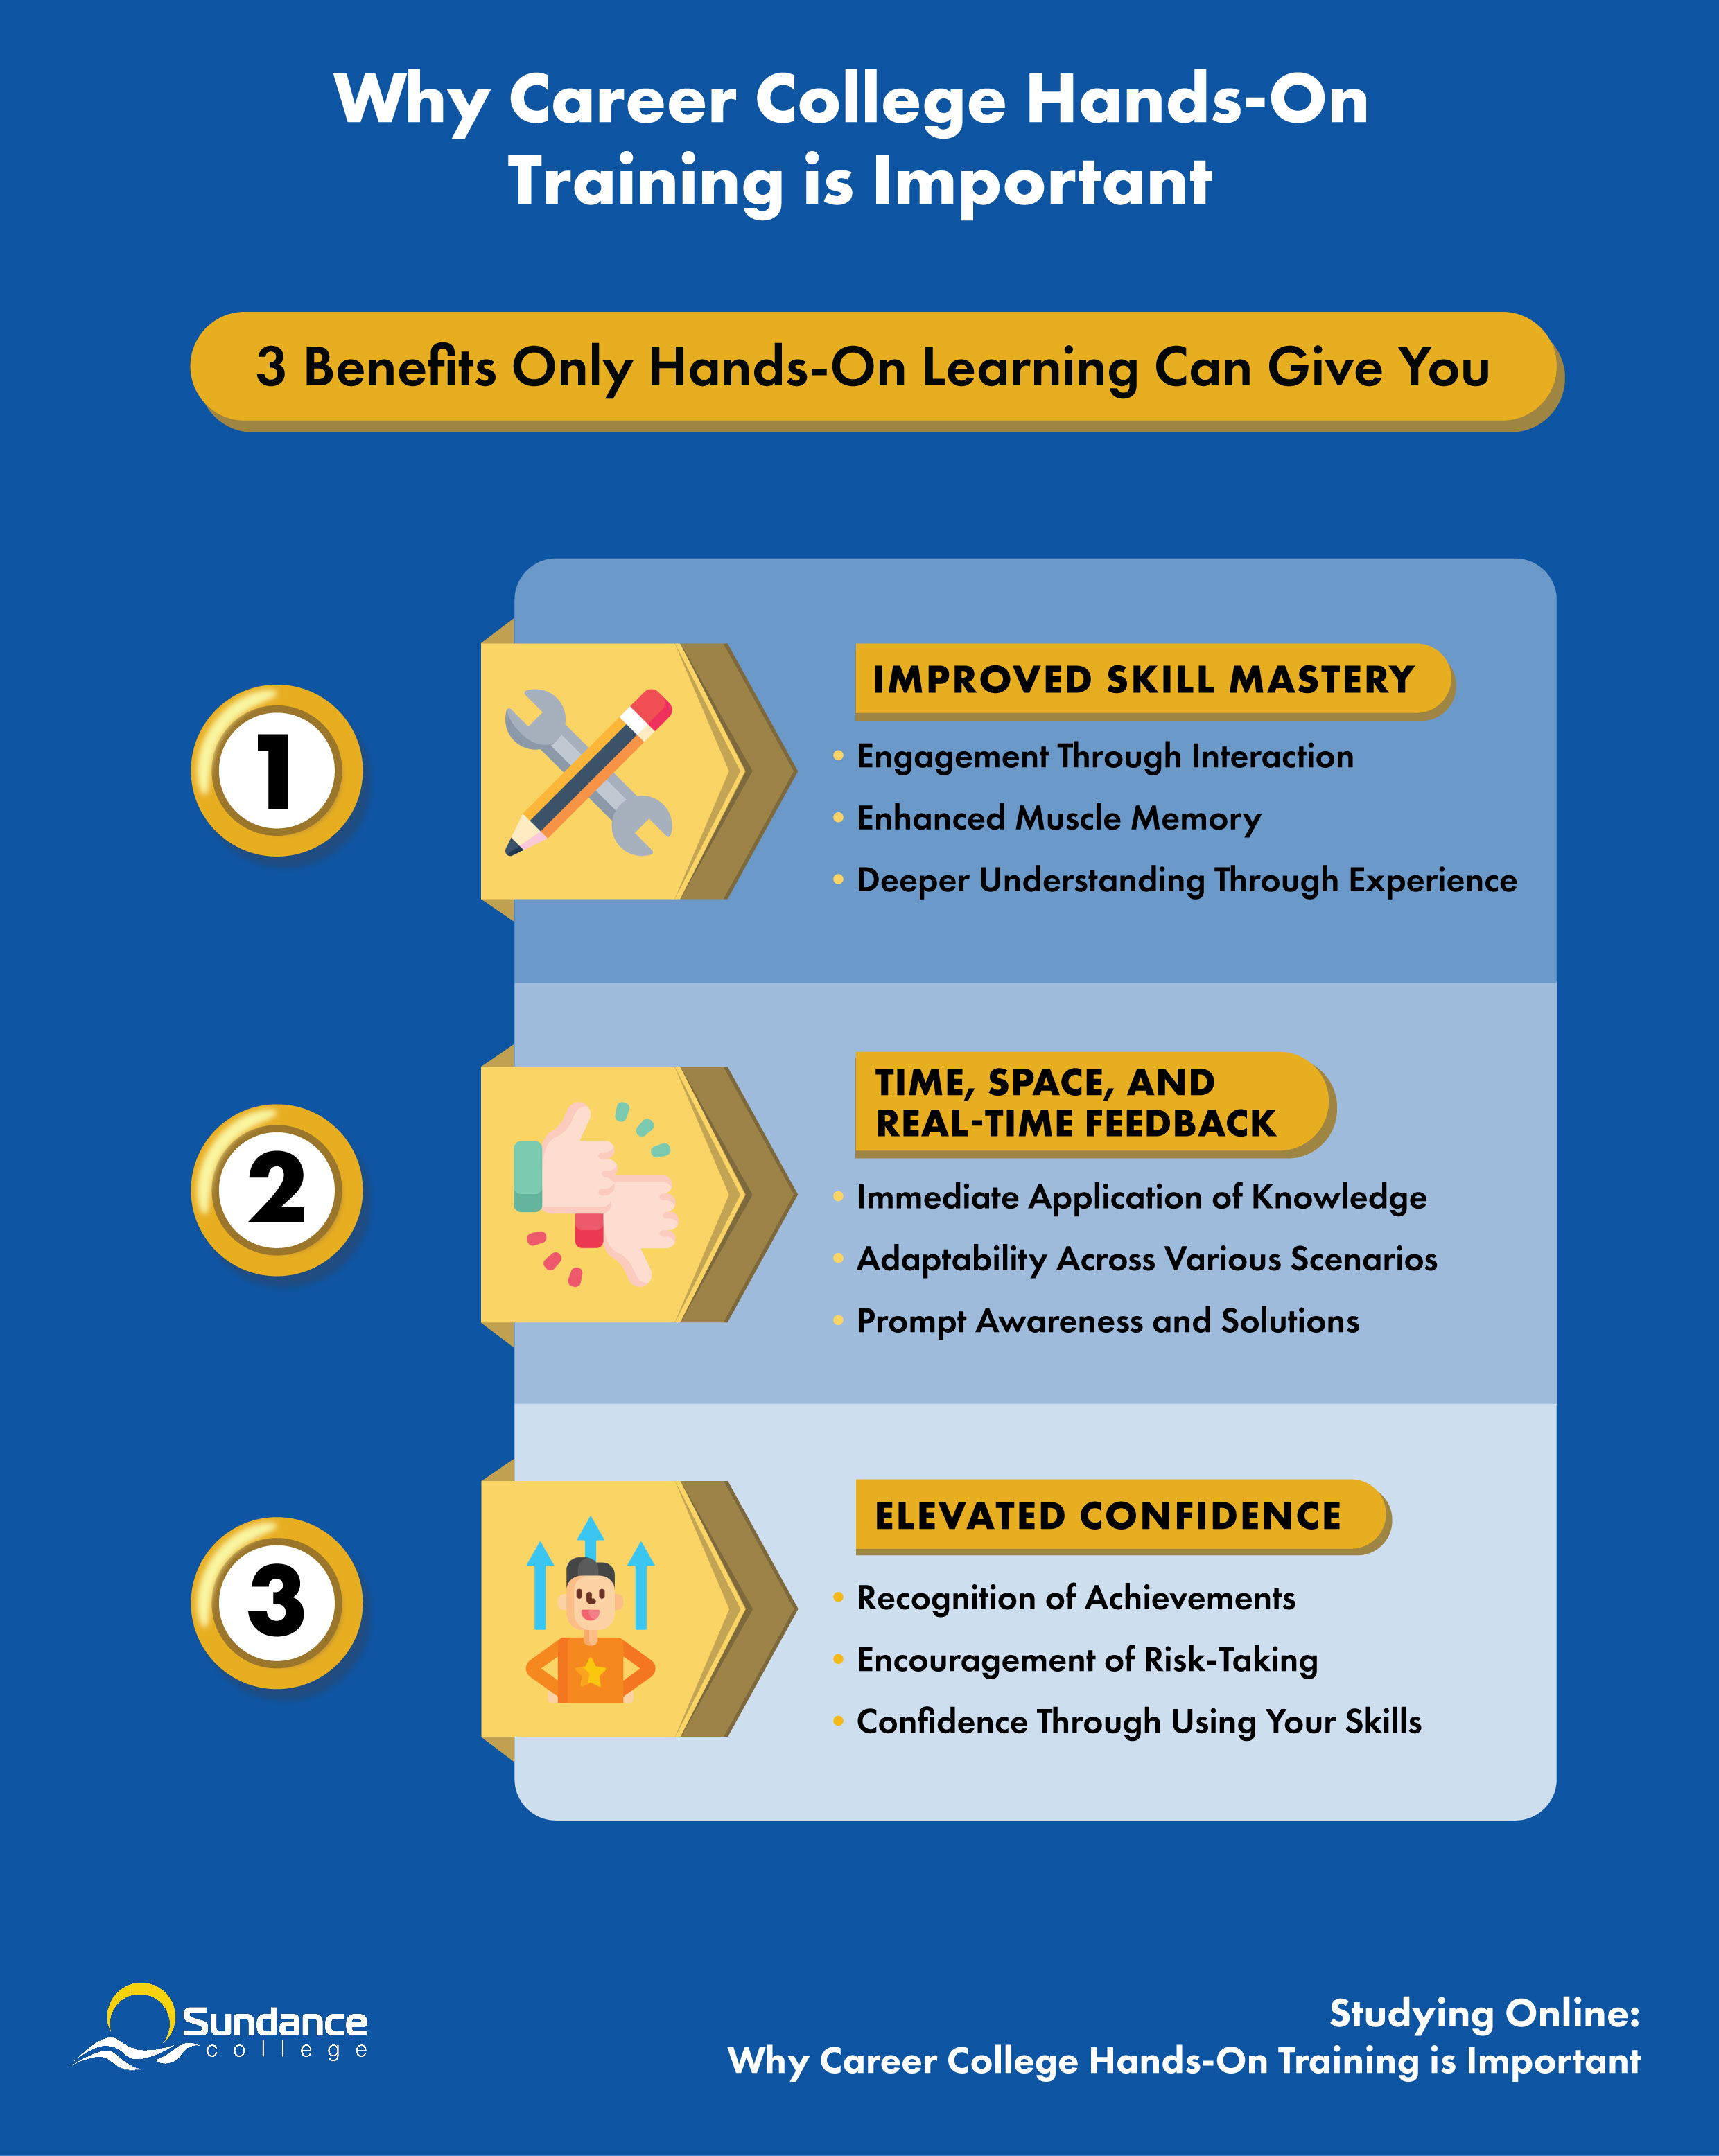 Infographic made by Sundance College abouth the three benefits only hands-on learning can give you.